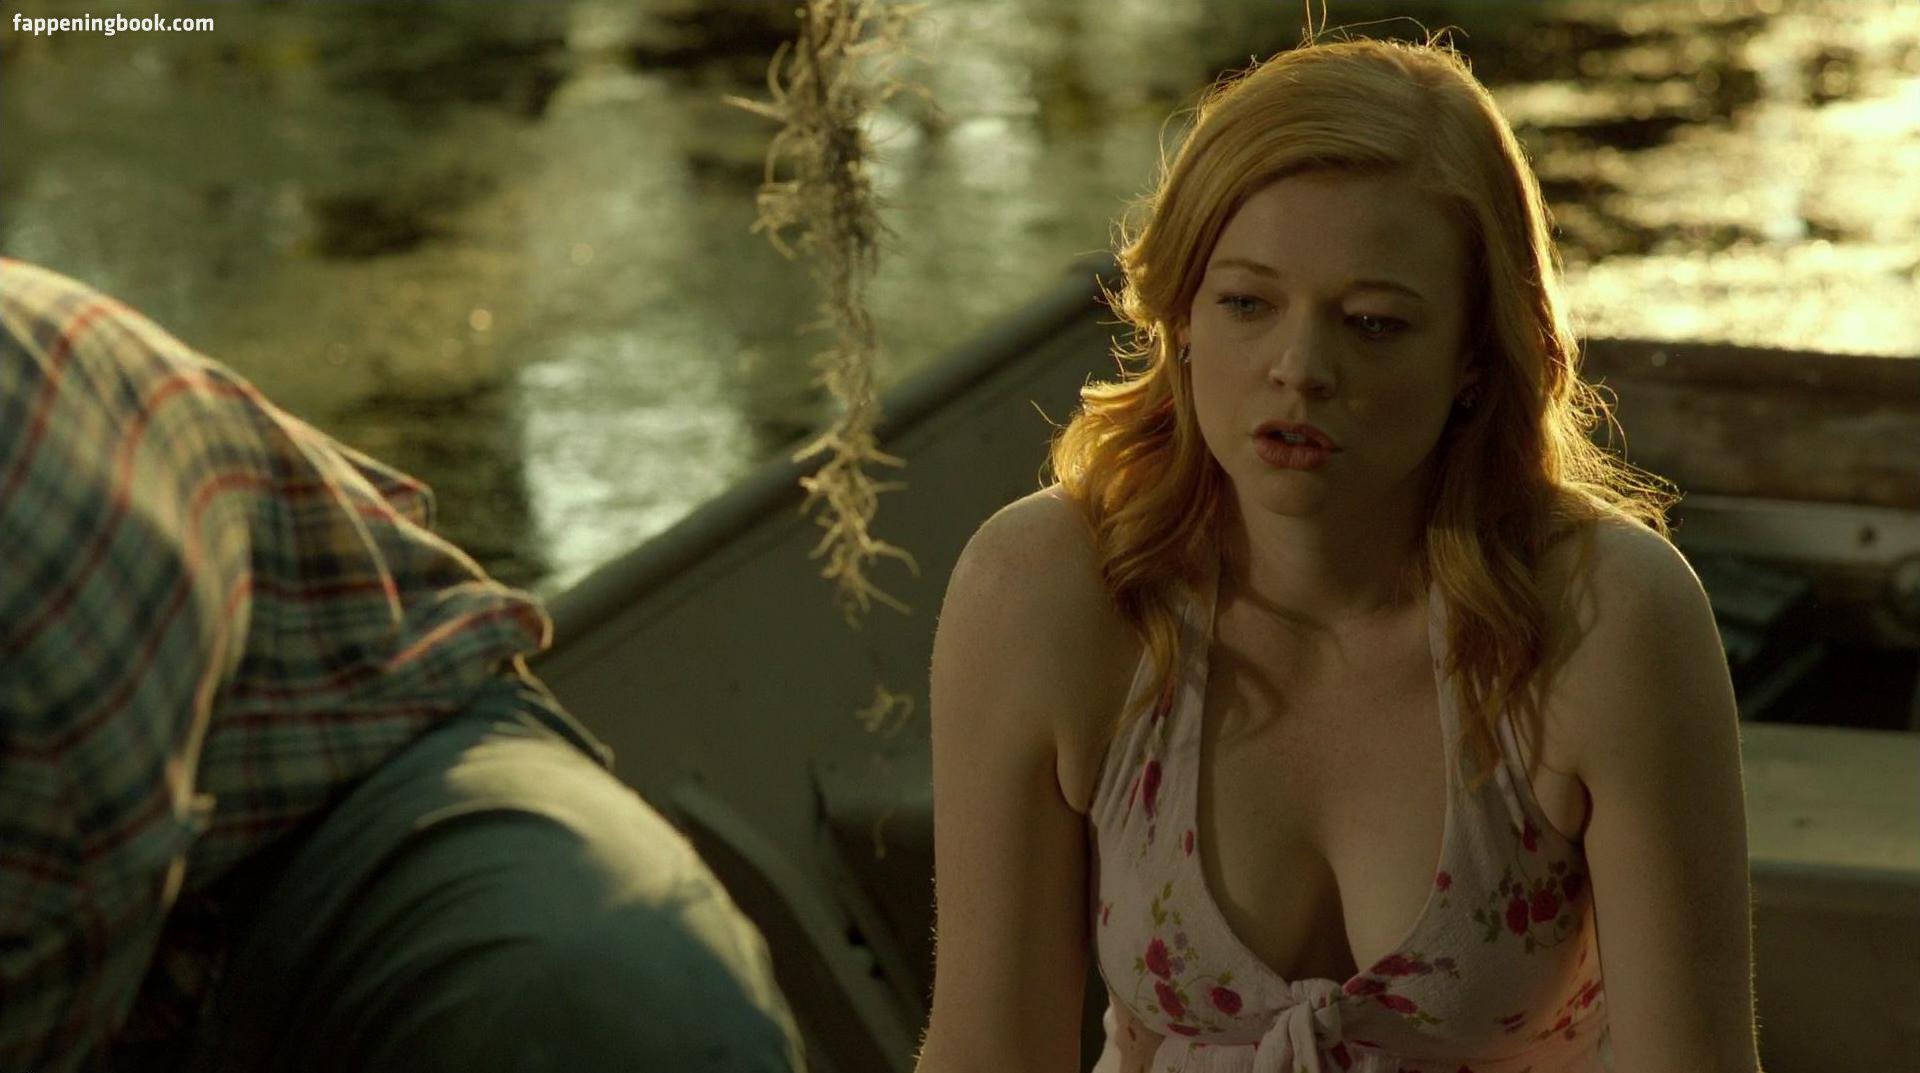 Sarah Snook Nude, The Fappening - Photo #483590 - FappeningBook.